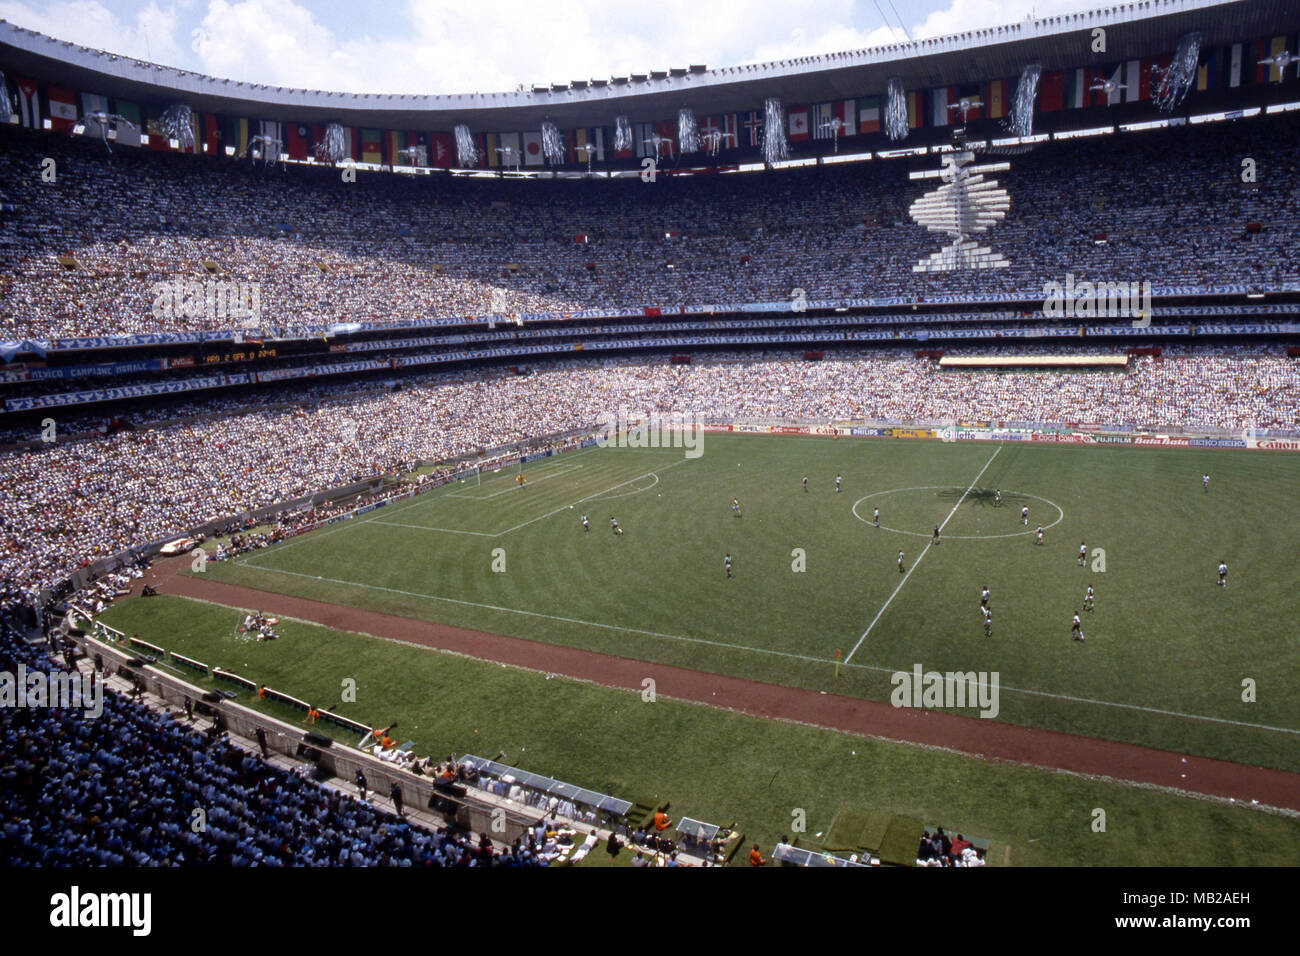 FIFA World Cup - Mexico 1986 29.6.1986, Estadio Azteca, Mexico, D.F. Final Argentina v West Germany. Azteca stadium during the final. Stock Photo